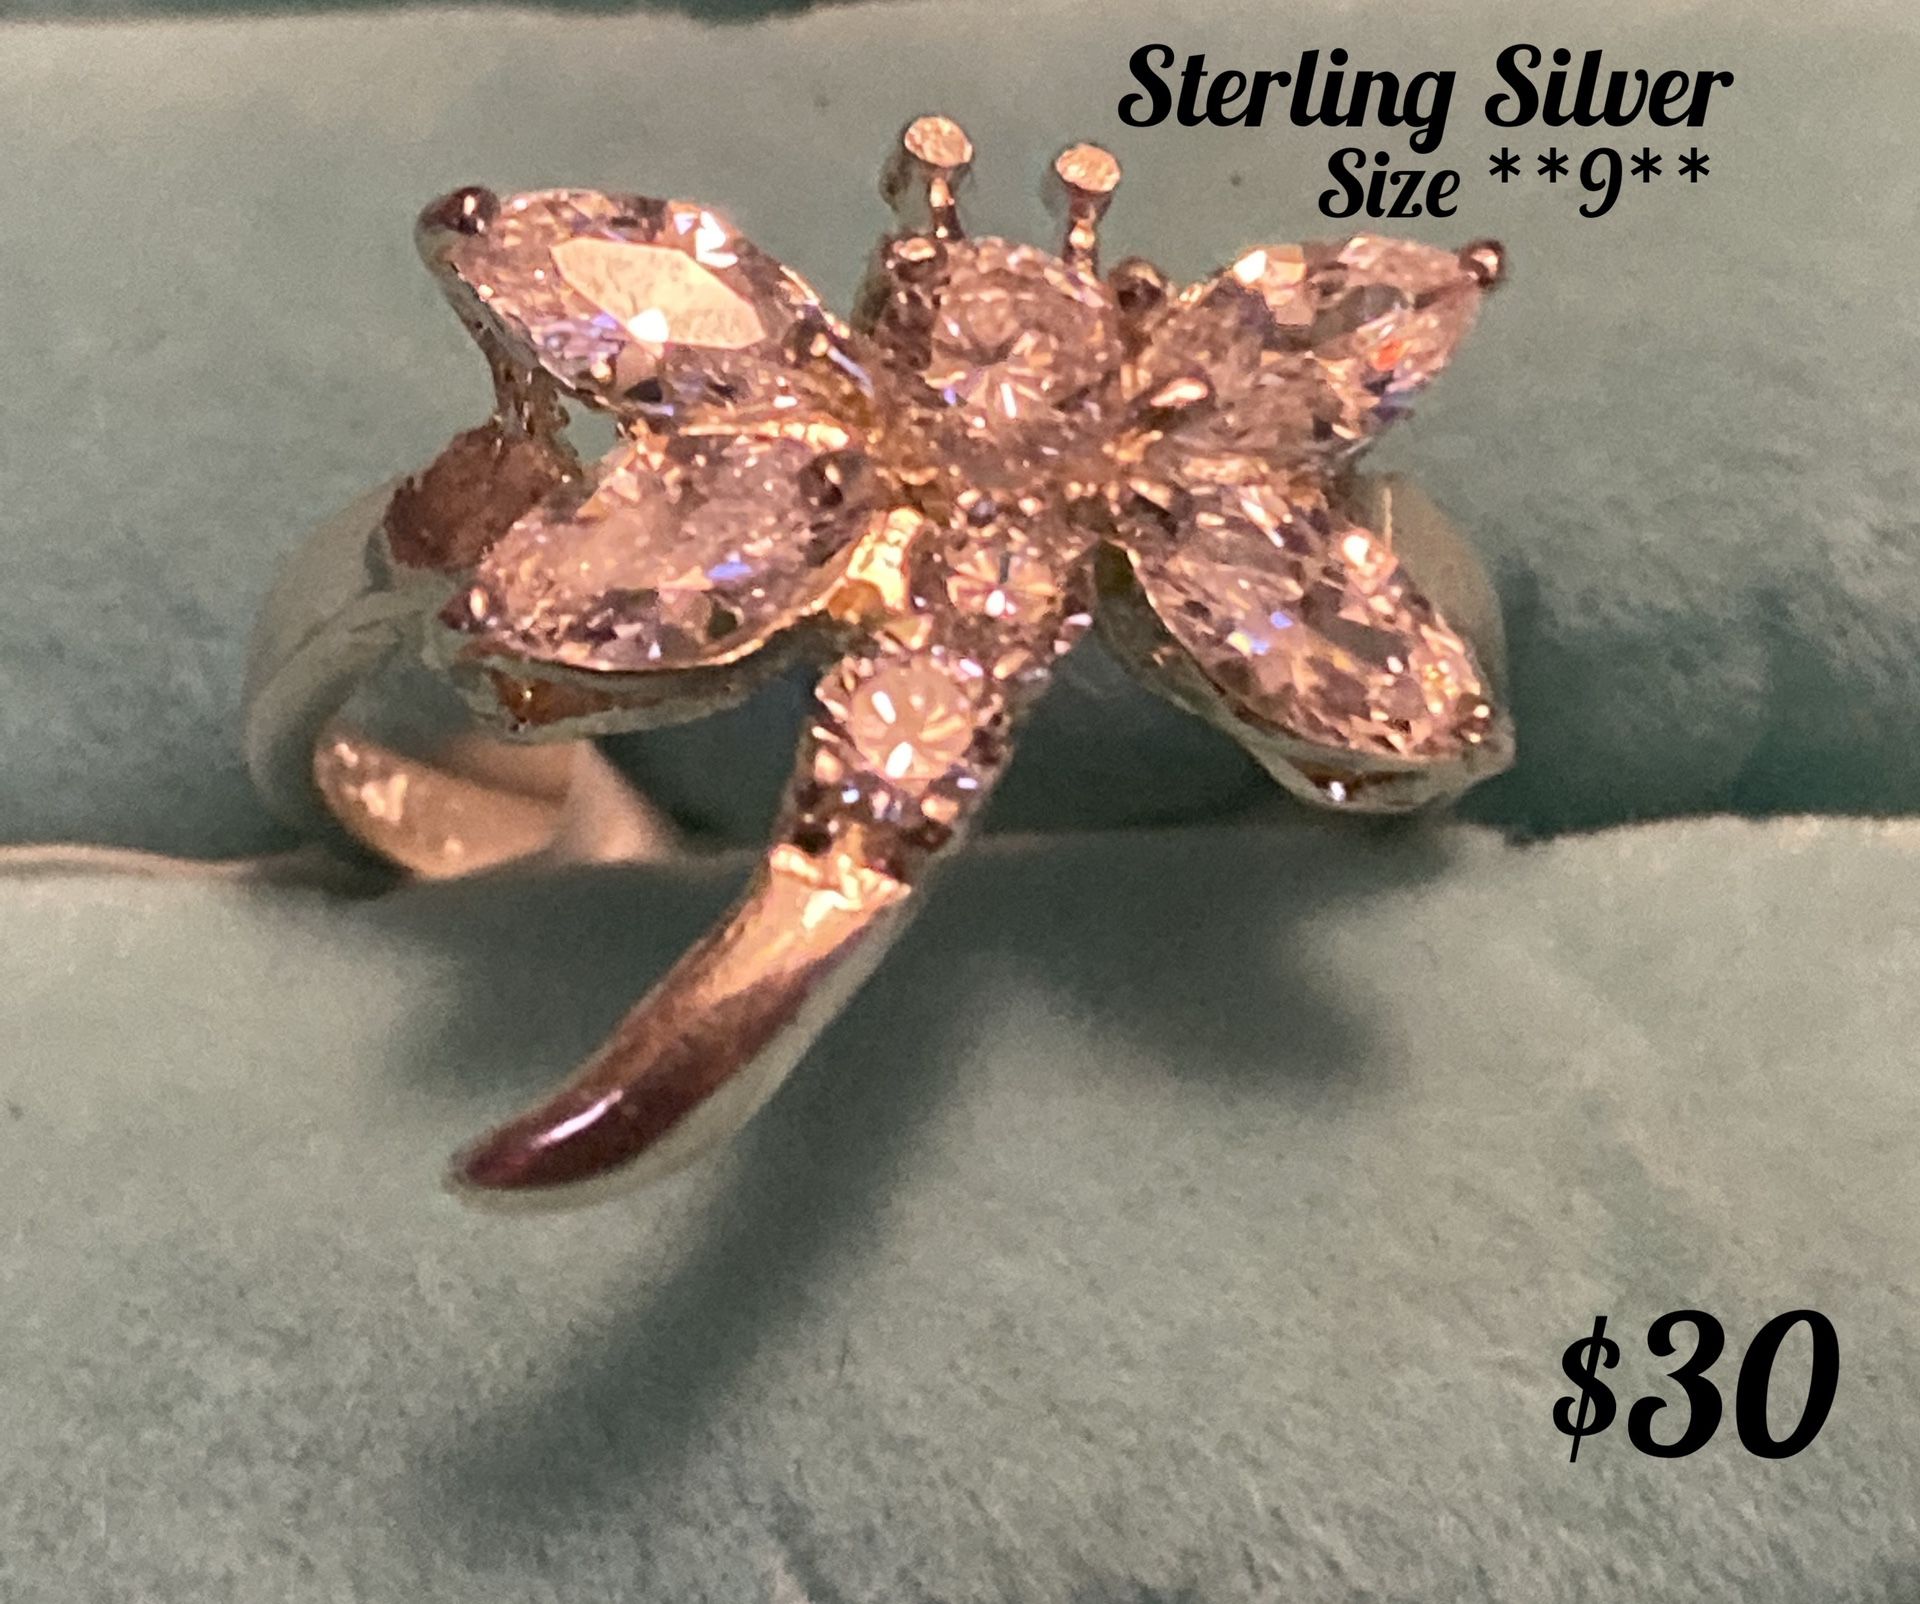 STERLING SILVER RING FIREFLY SIZE **9**